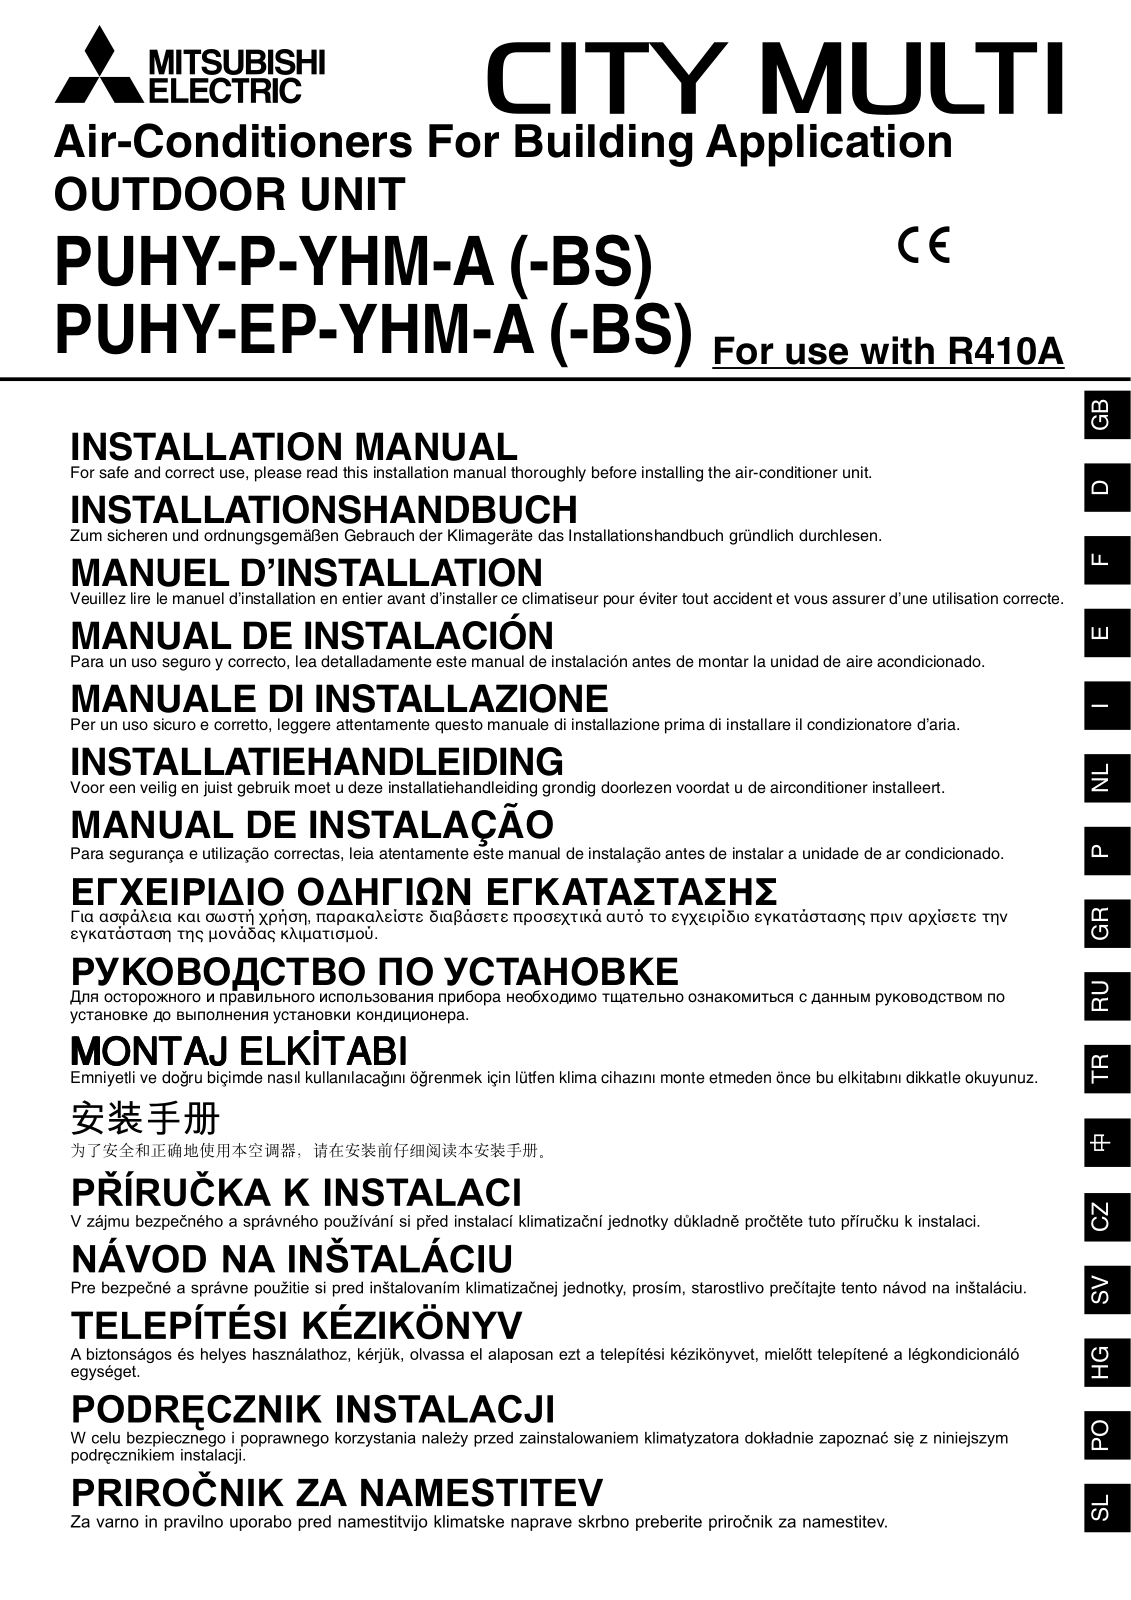 Mitsubishi PUHY-P-YHM-A (-BS), PUHY-EP-YHM-A (-BS) Installation Manual